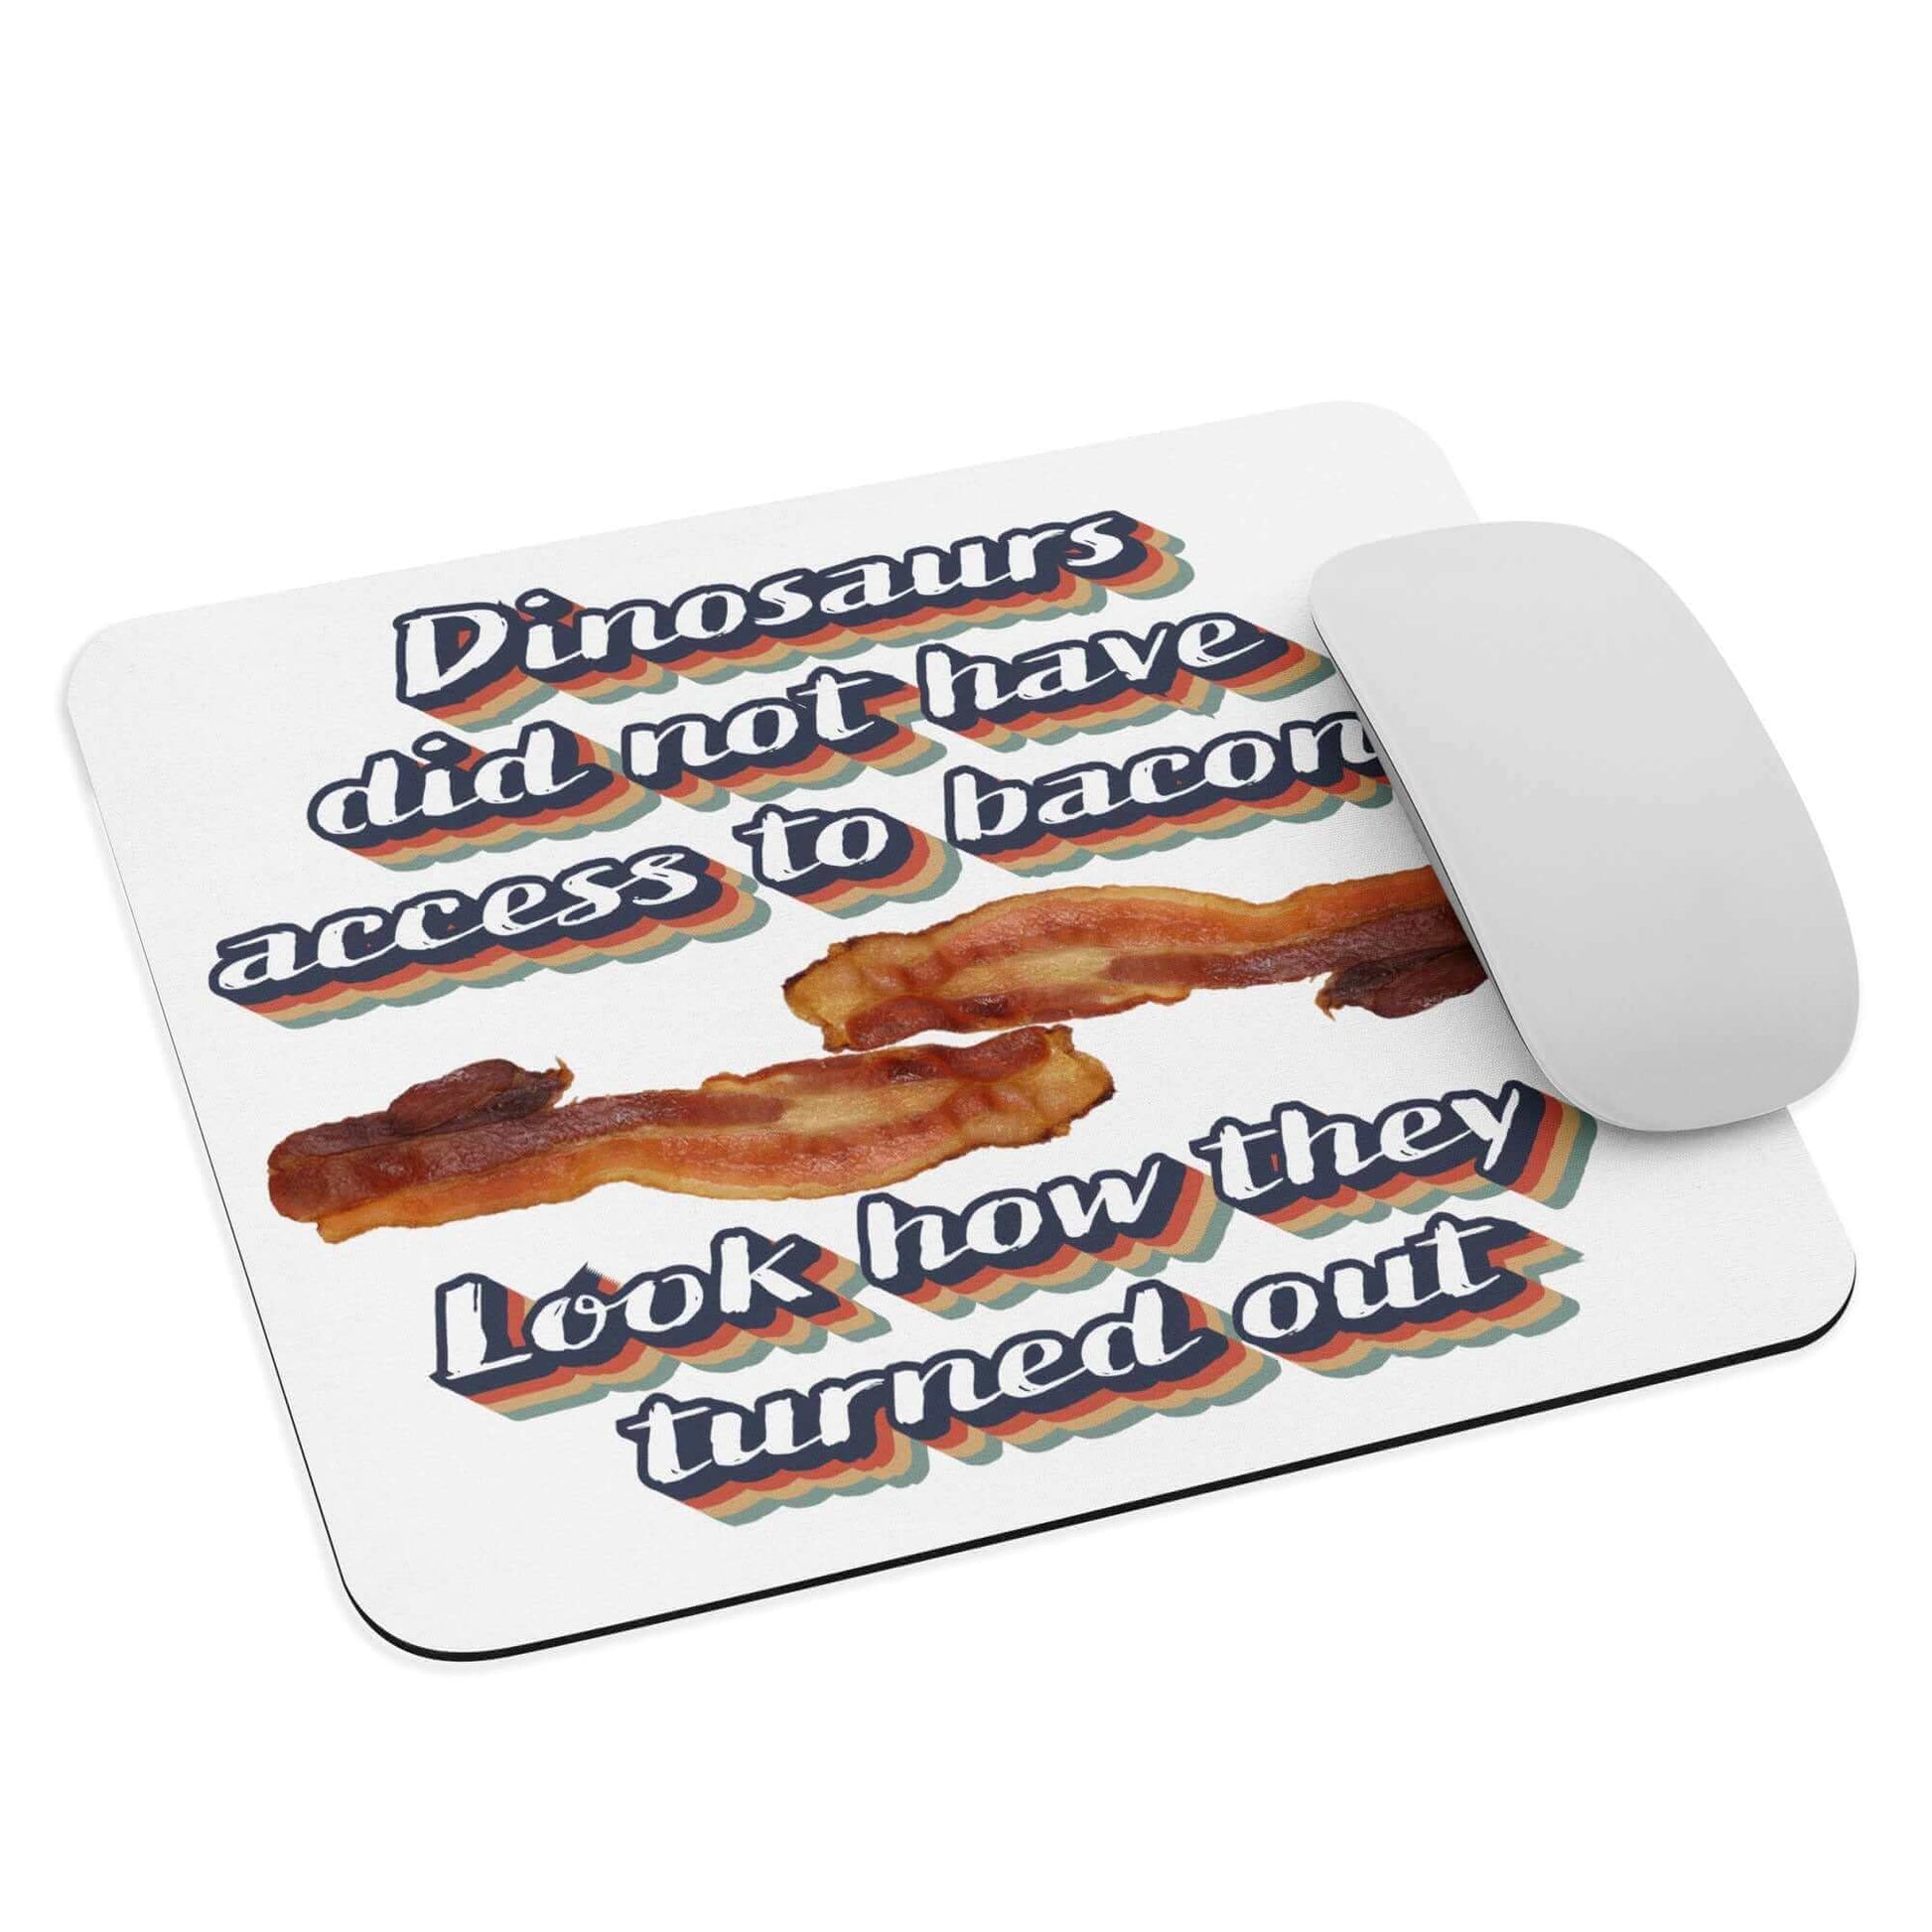 Dinosaurs did not have access to bacon.. Look how they turned out - Mouse pad Ancestral Diet Atkins Diet bacon Baconator Barbecue Butchery Carnivore Carnivorous Diet Custom mouse pad Dinos dinosaurs eat Fishing Free-Range Meat Game Meat Grass-Fed Meat Grilling High-Fat Diet Hunting IT keto Ketogenic LCHF low carb high fat Low-Carb Diet Meat Meat Candy meat diet non-slip mouse pad Omnivore Paleo Predator. Meat Eater Protein Protein Shake Red Meat Steakhouse White Meat